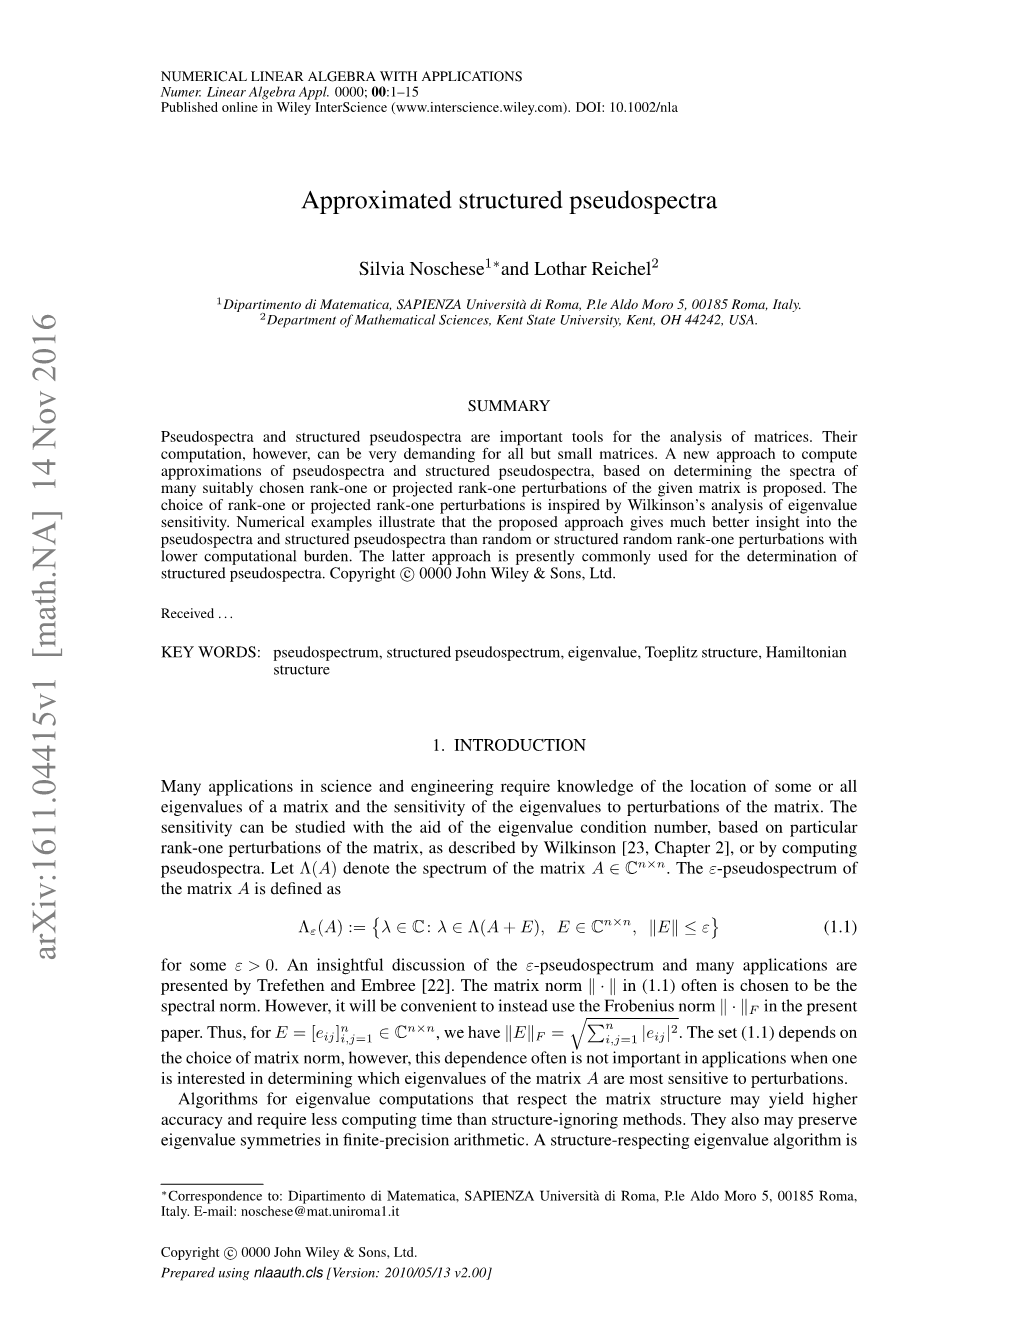 Approximated Structured Pseudospectra